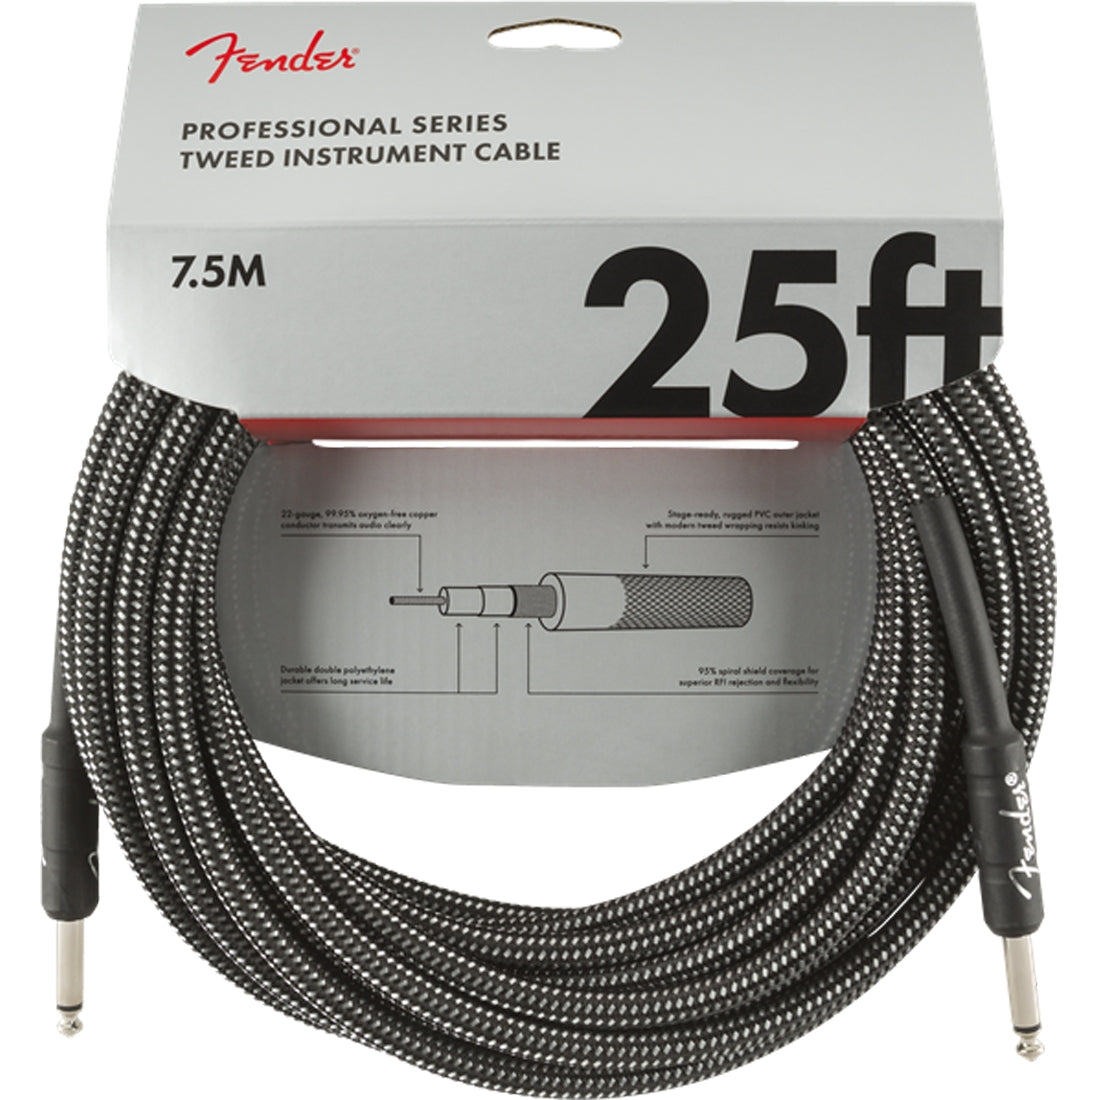 Fender Professional Series Instrument Cable 7.5m (25ft) Gray Tweed - 0990820071